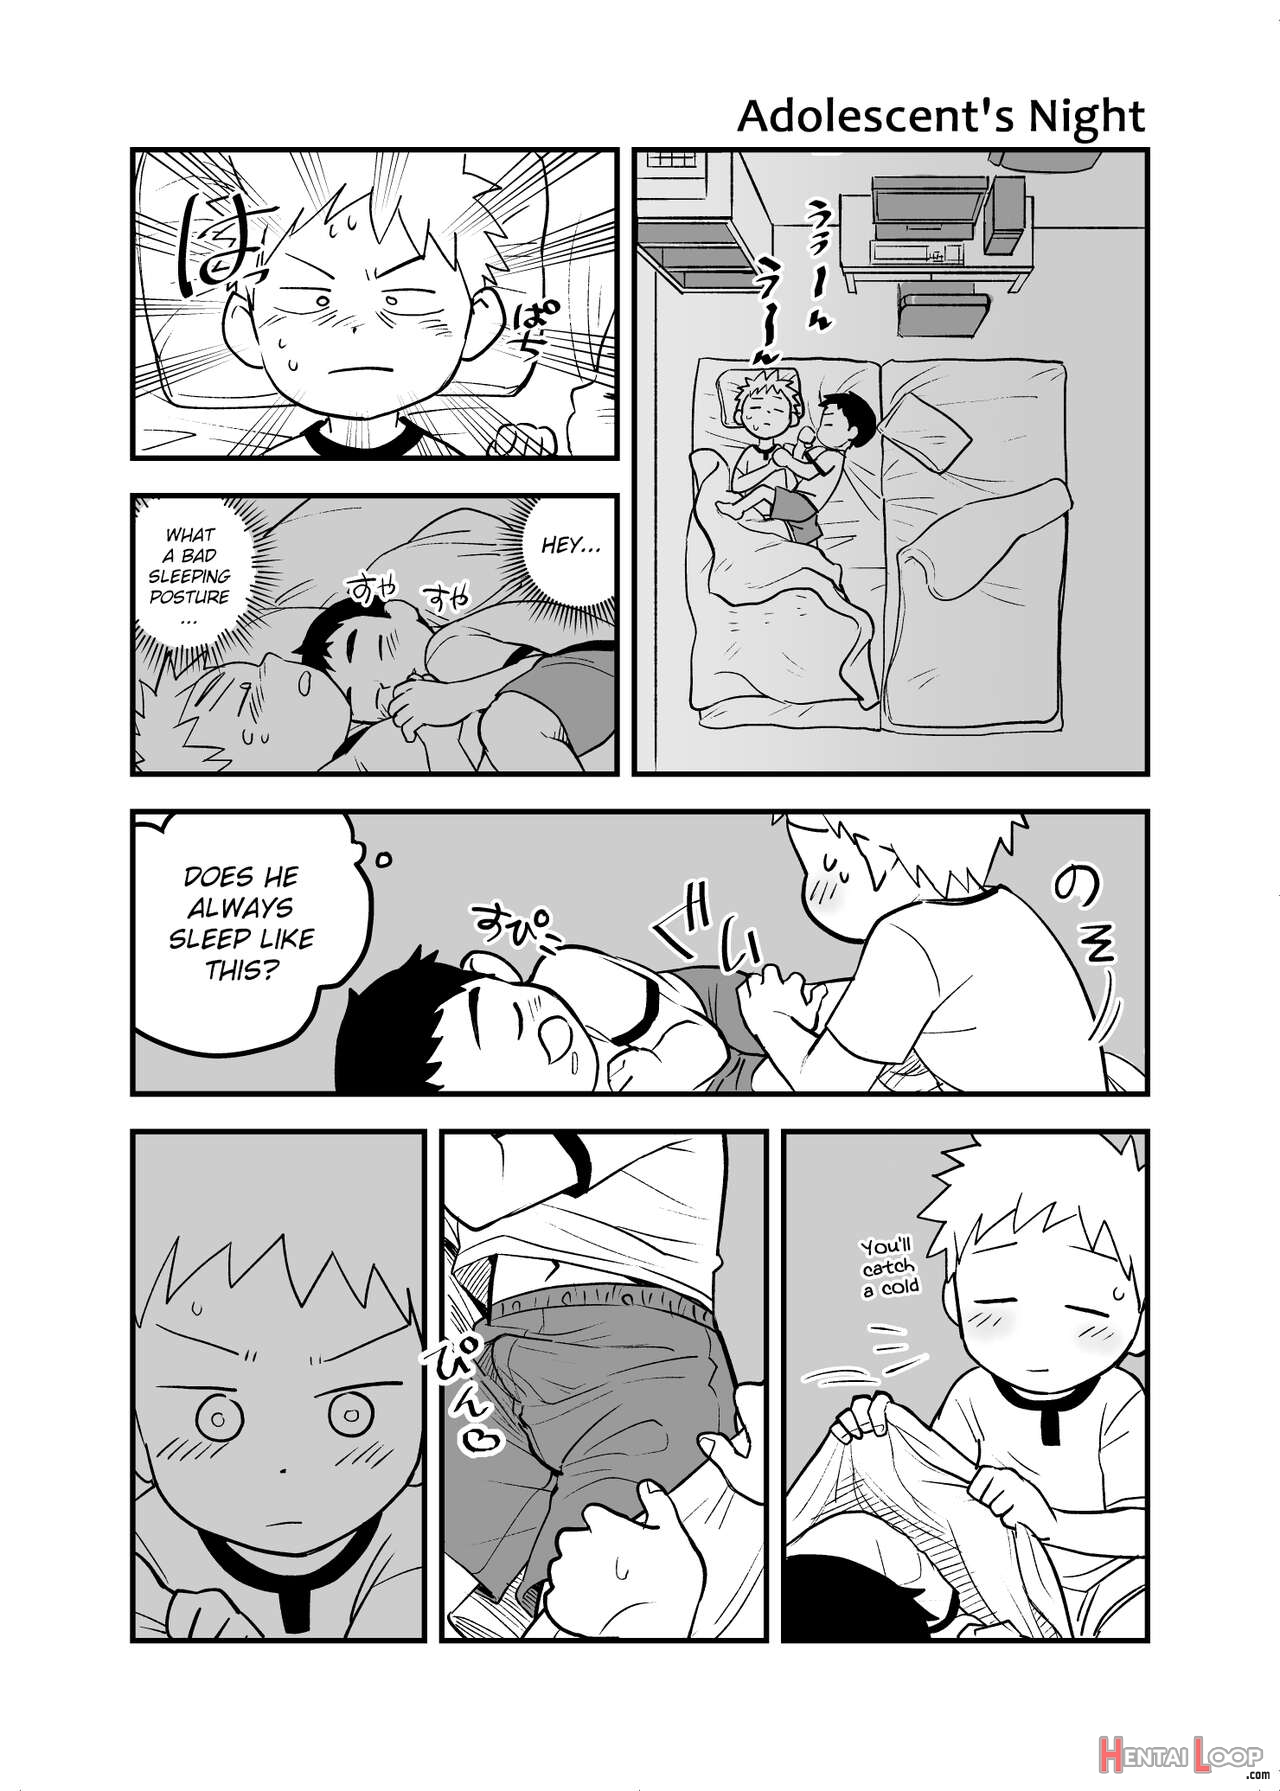 Adolescent's Night page 2